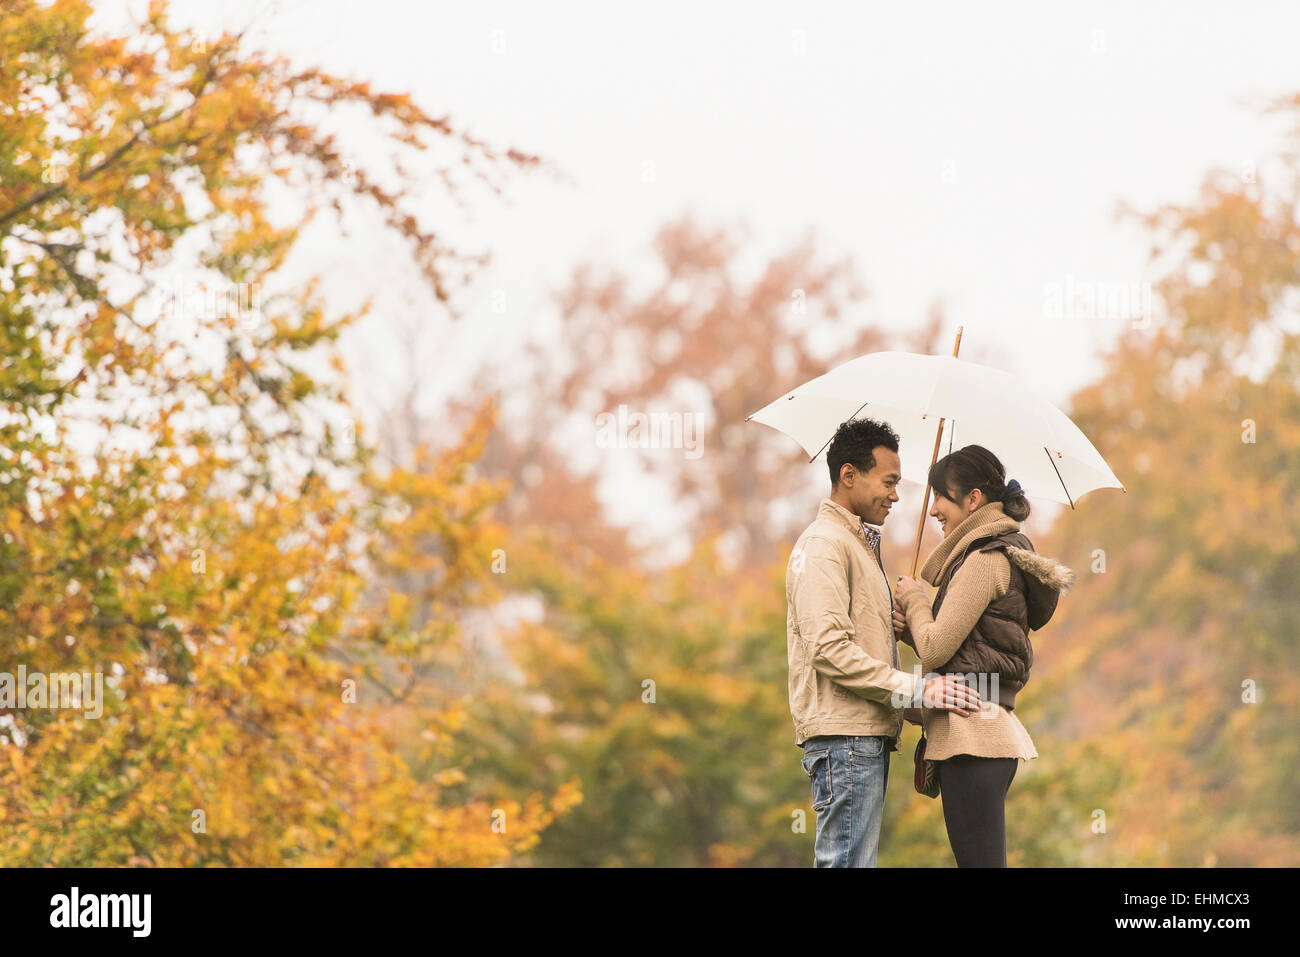 Couple standing with umbrella in park Banque D'Images